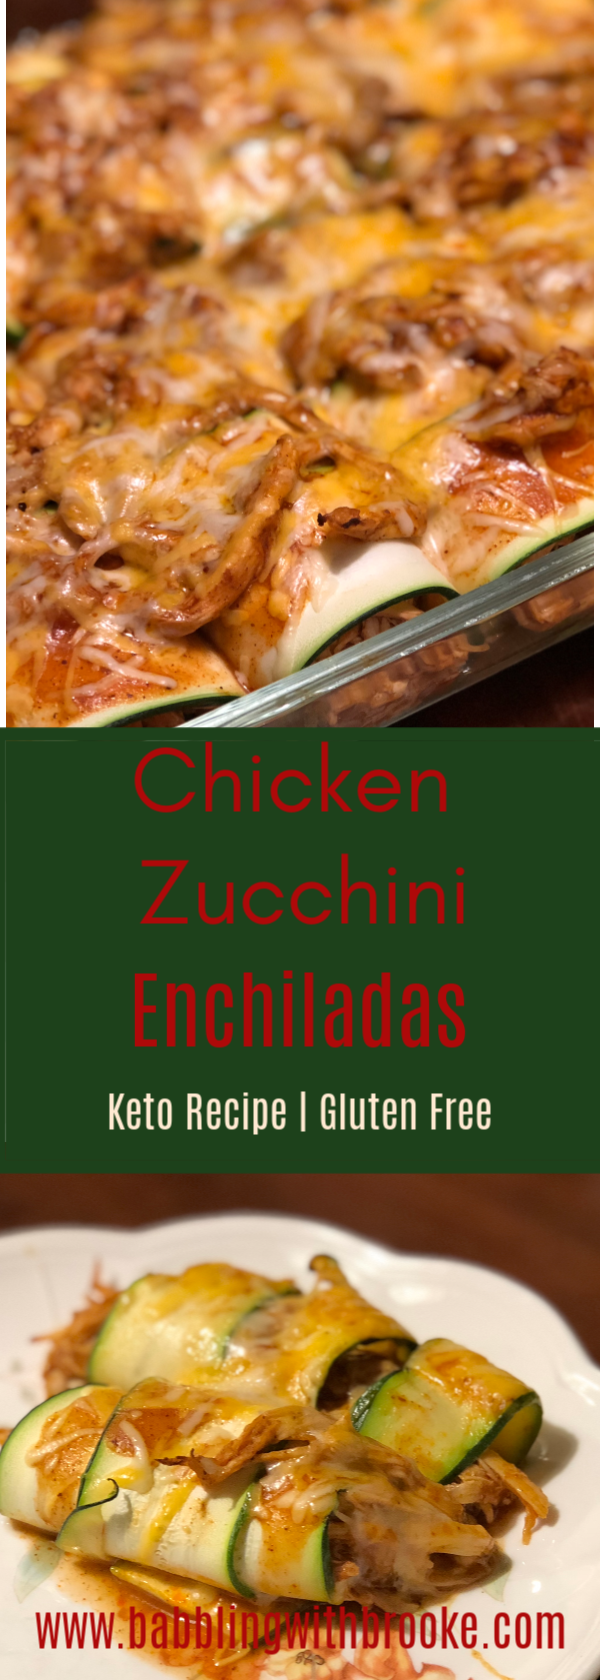 These easy, keto and gluten free enchiladas are perfect for a busy night in with the family! This recipe is easy and simply full of flavor. Zucchini enchiladas are the perfect replacement for regular enchiladas on the keto diet. #ketodinnerrecipe #glutenfreeenchiladas #zucchinienchiladarecipe #easyketodinner #ketoenchiladas